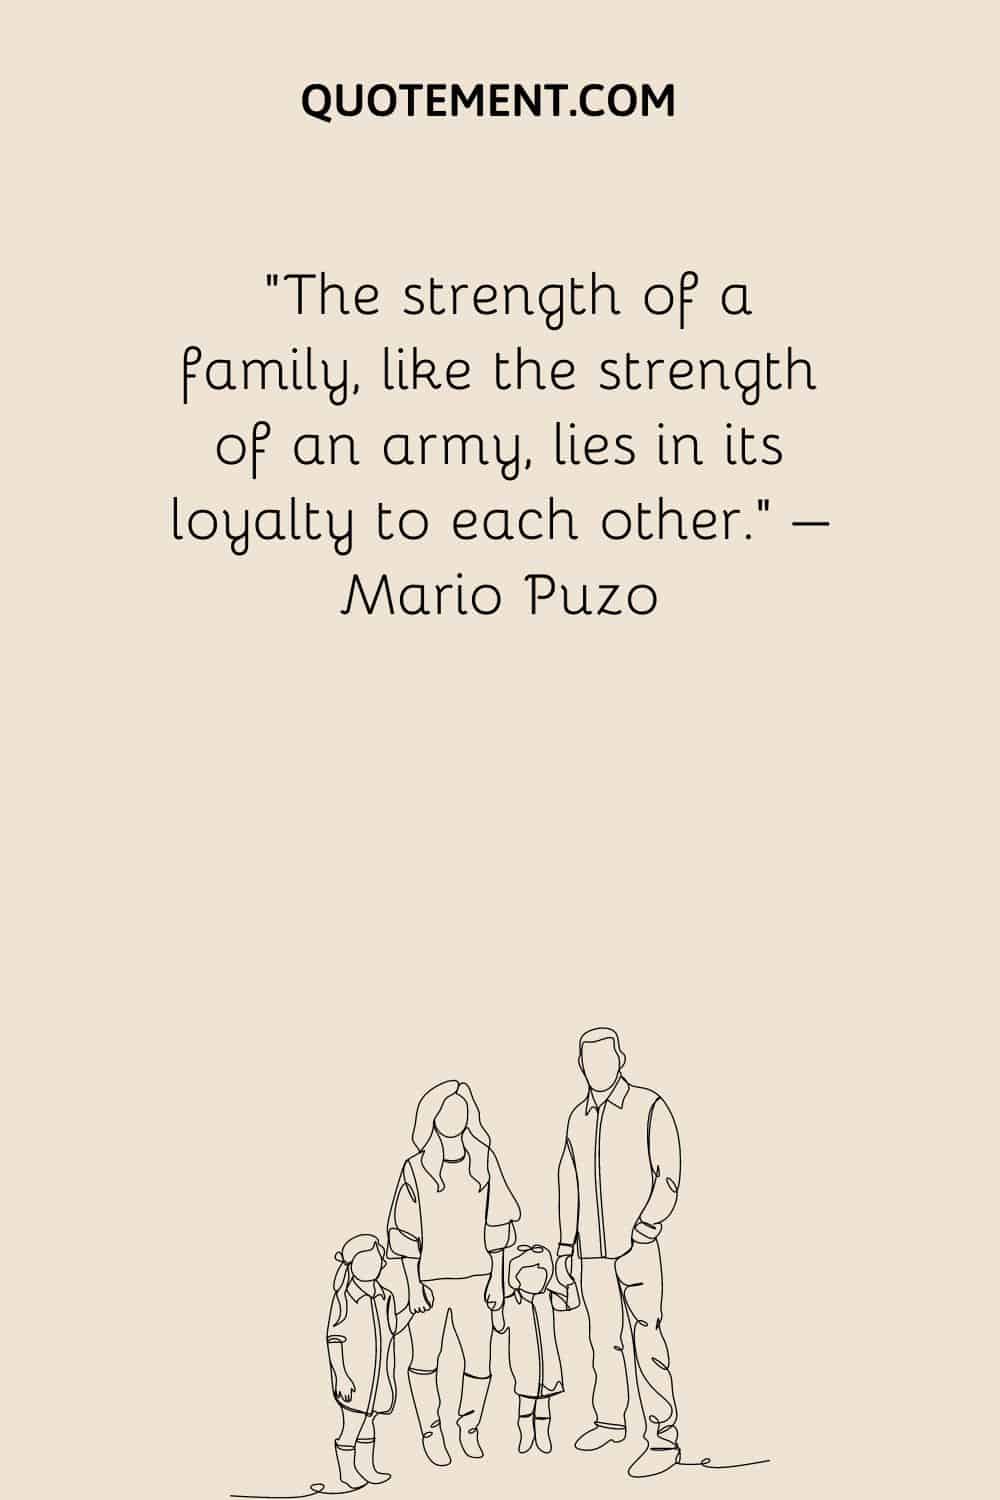 The strength of a family, like the strength of an army